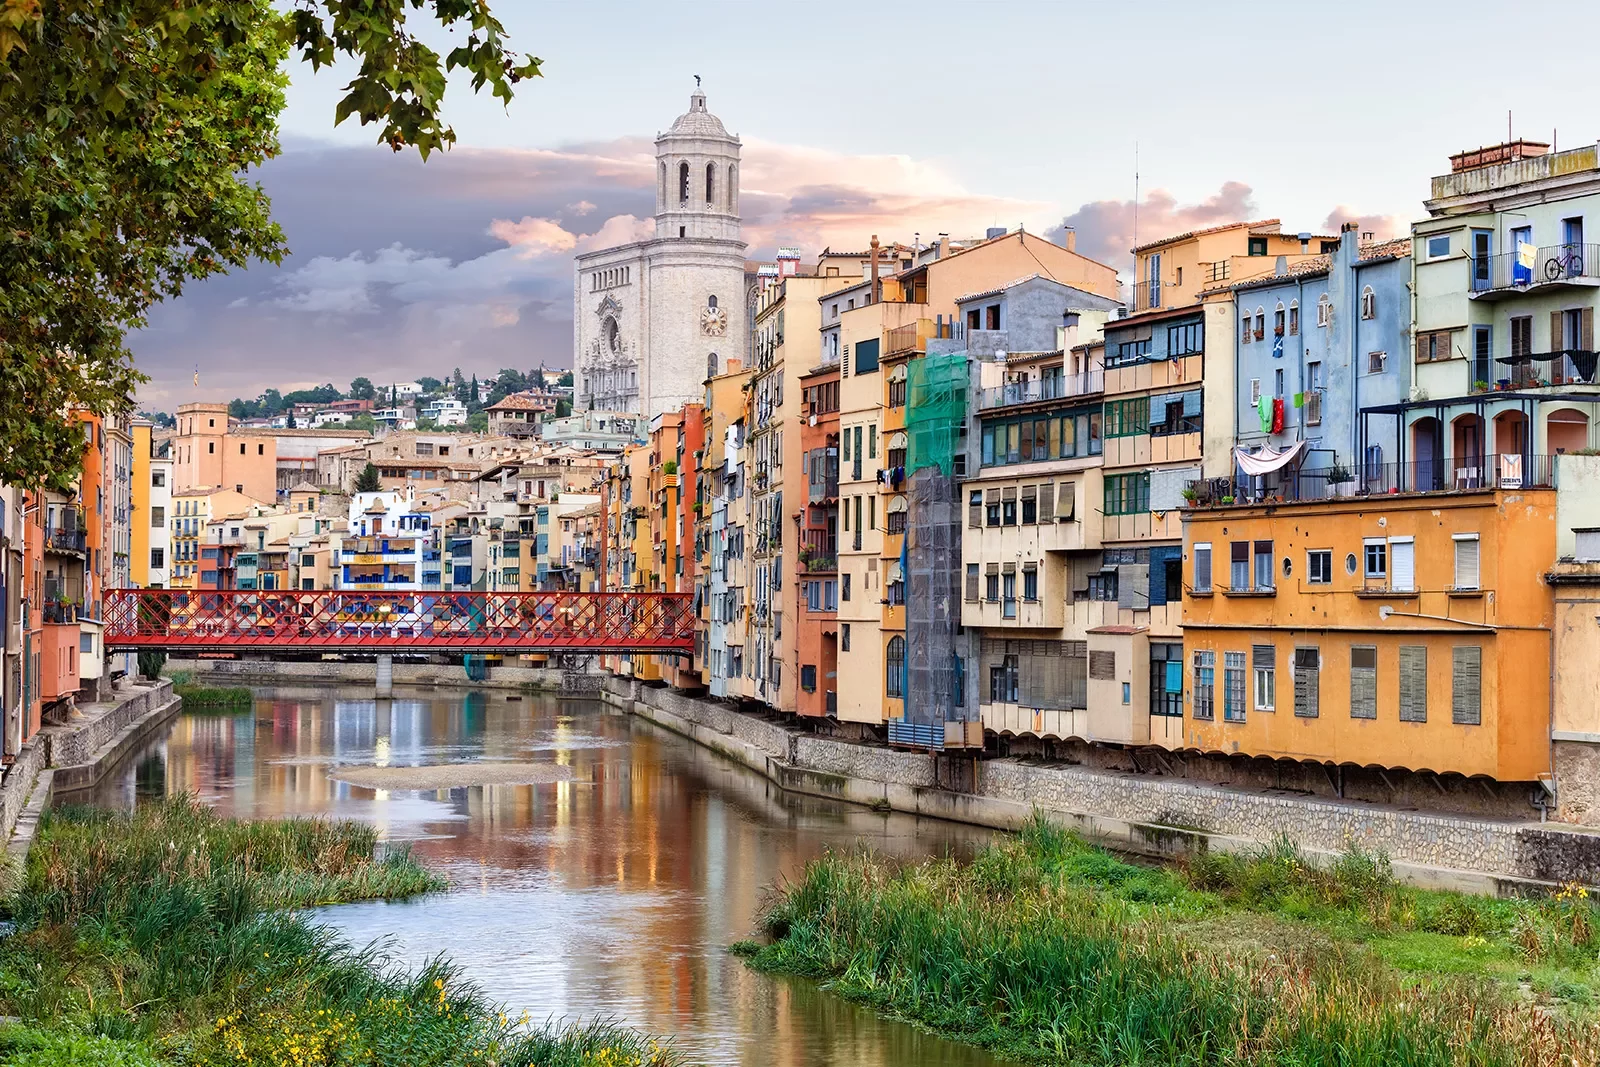 Wide shot of Onyar River running through Girona and it's colorful buildings.